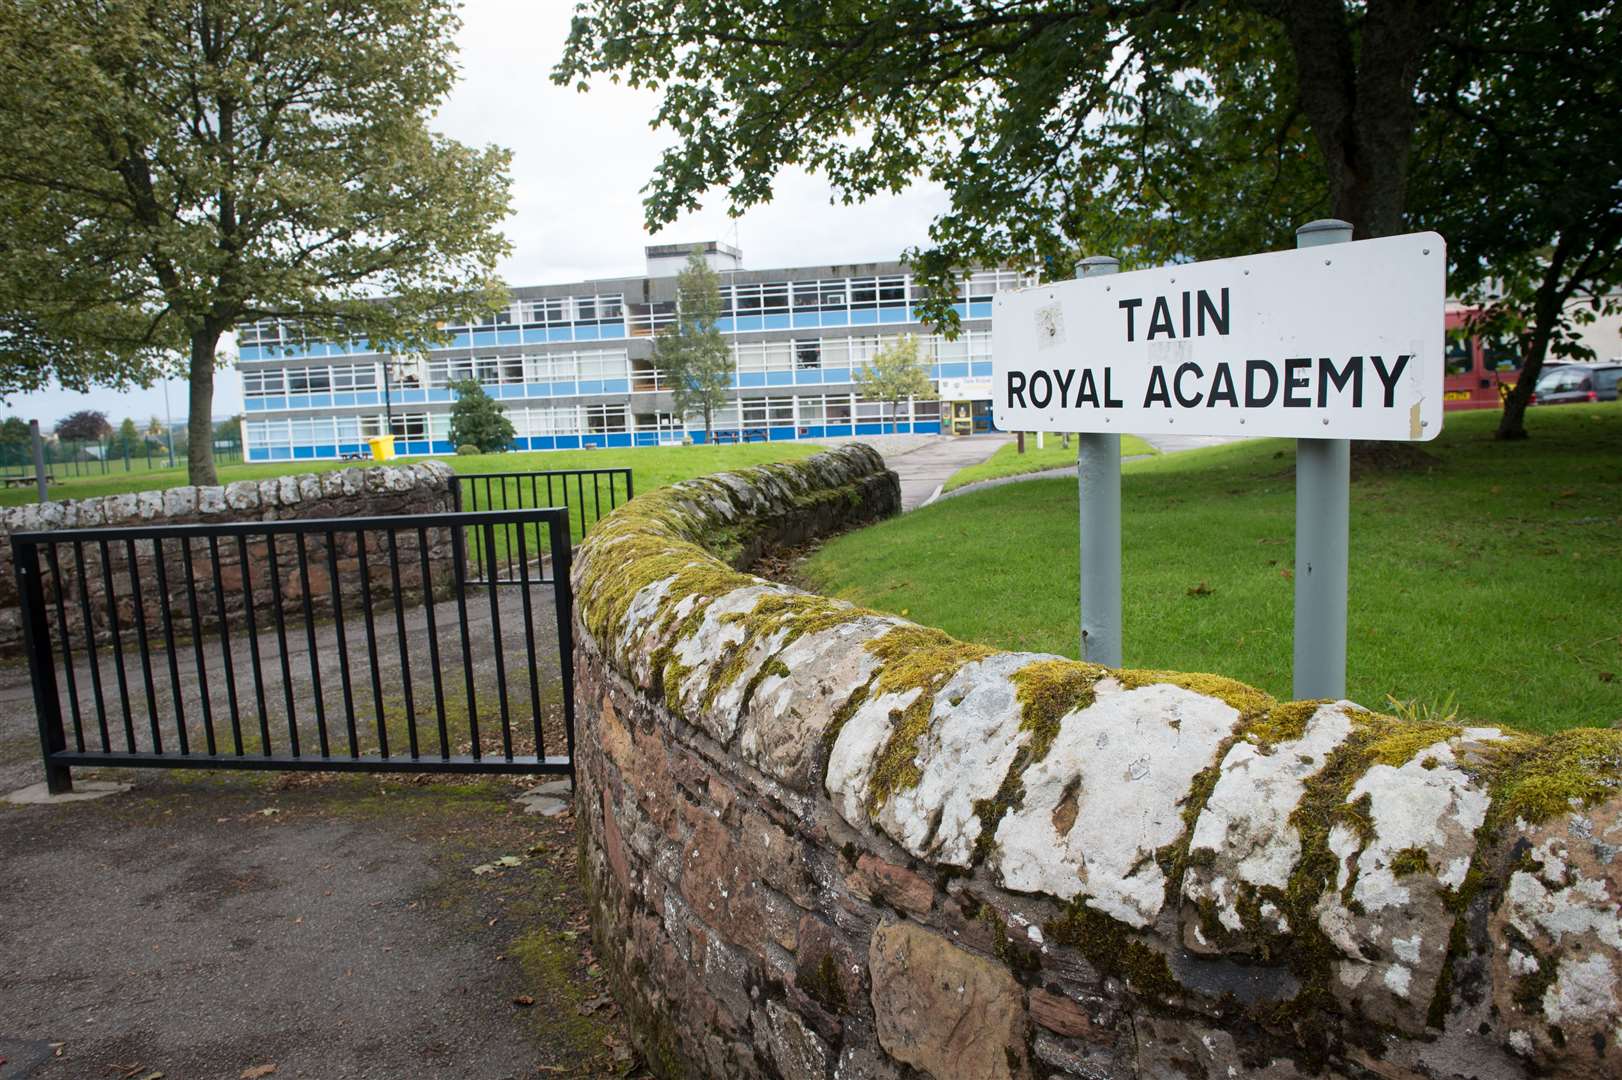 The new facility will replace several existing schools – amongst them Tain Royal Academy.